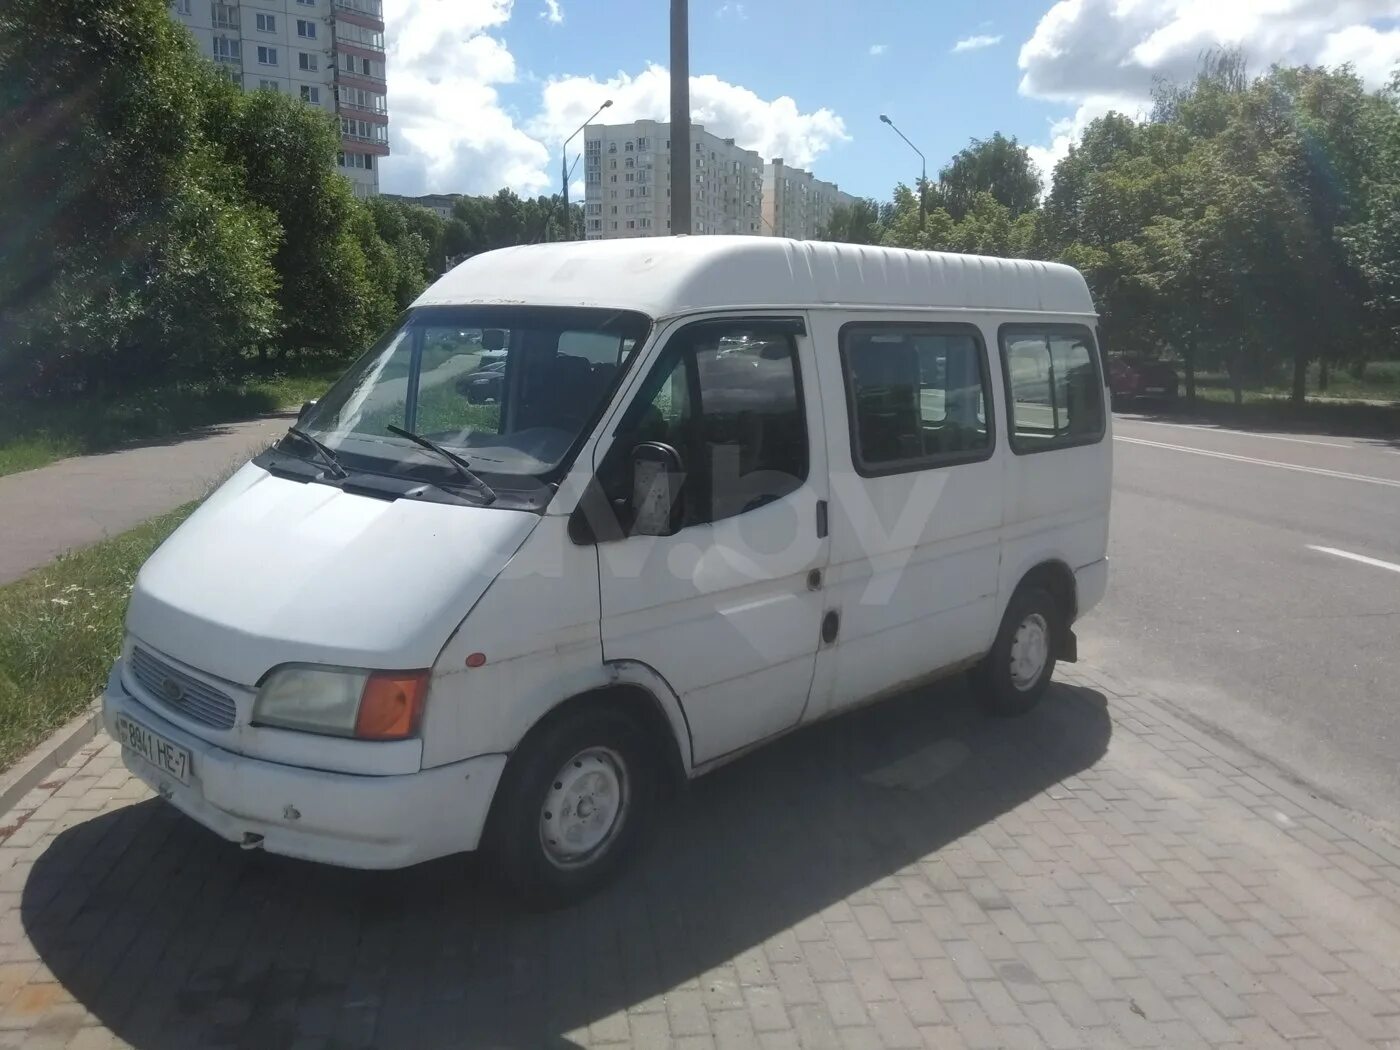 Ford Transit 1998. Ford Transit 2227sd. Форд Транзит 1998г. Ford Transit 1998 Минск.